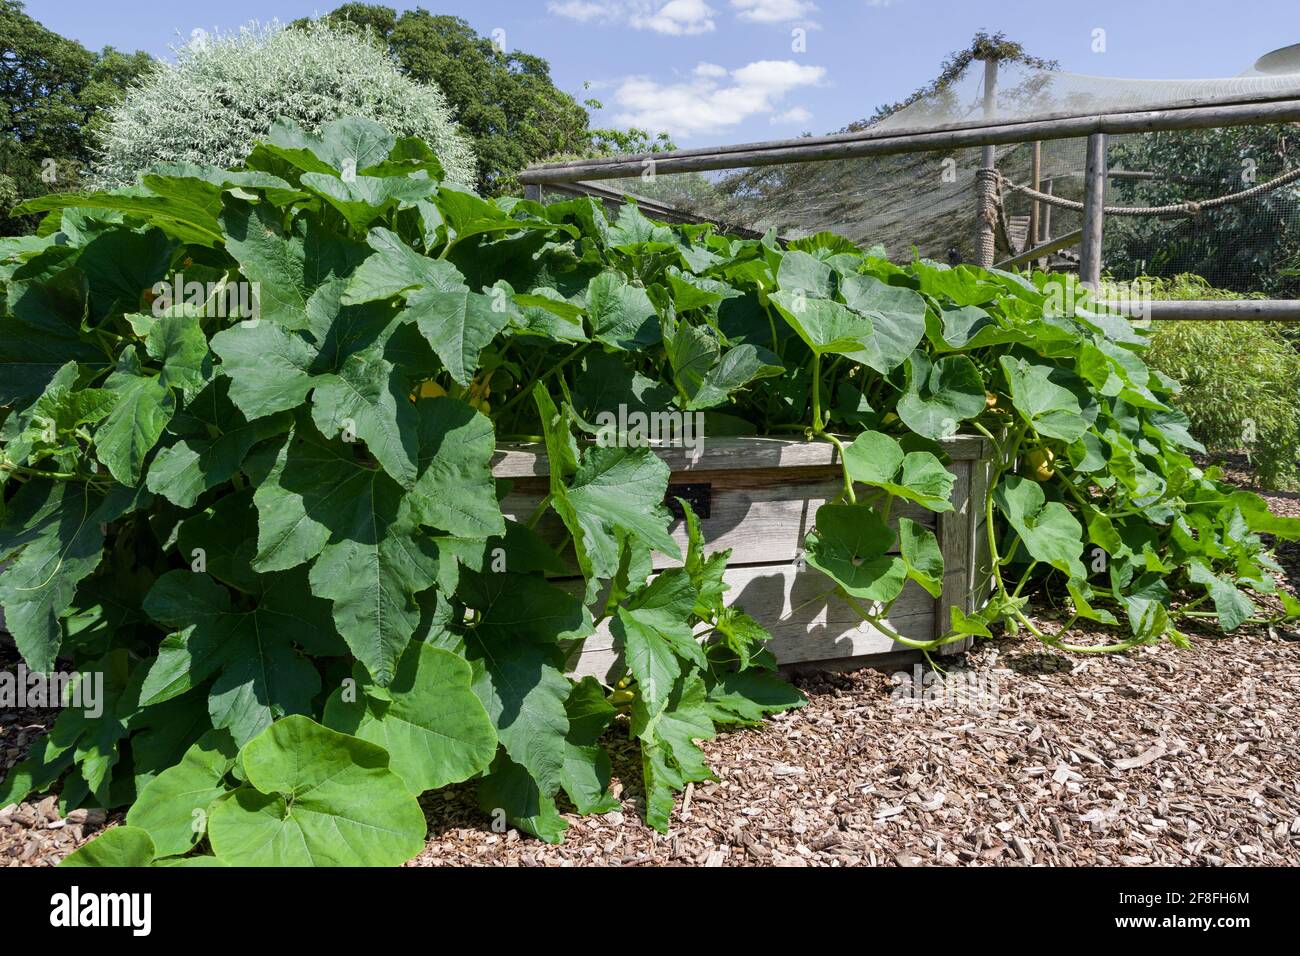 Vegetables growing in raised beds in summer, Castle Ashby Gardens, Northamptonshire, UK Stock Photo